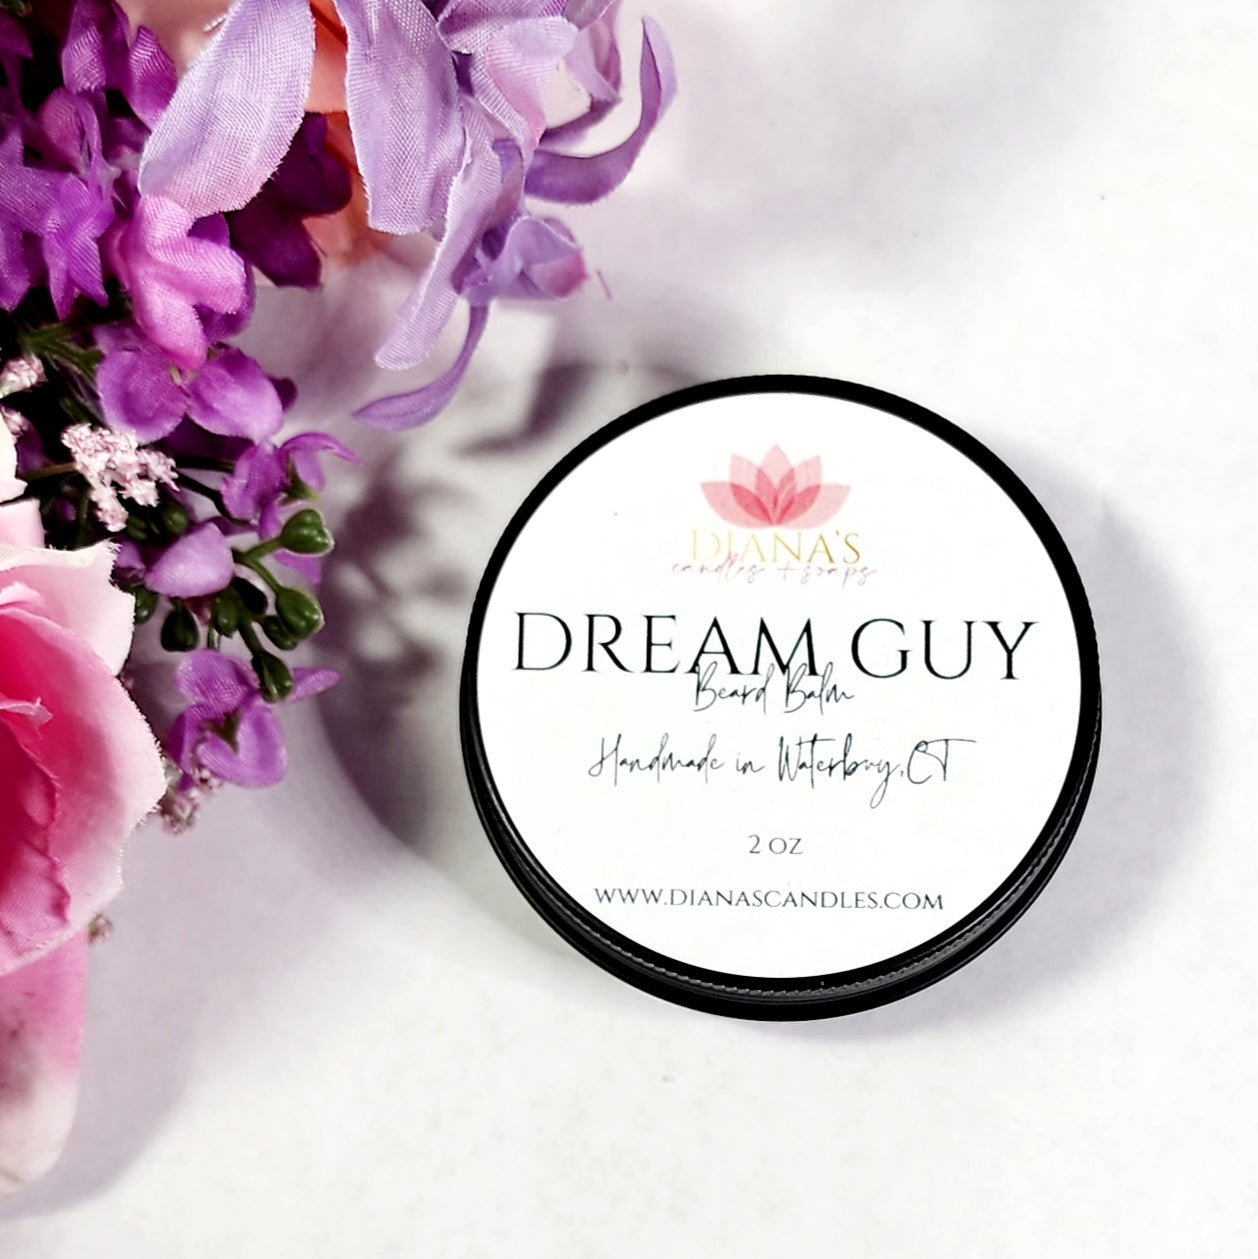 Dream Guy Beard Balm - Diana's Candles and Soaps 